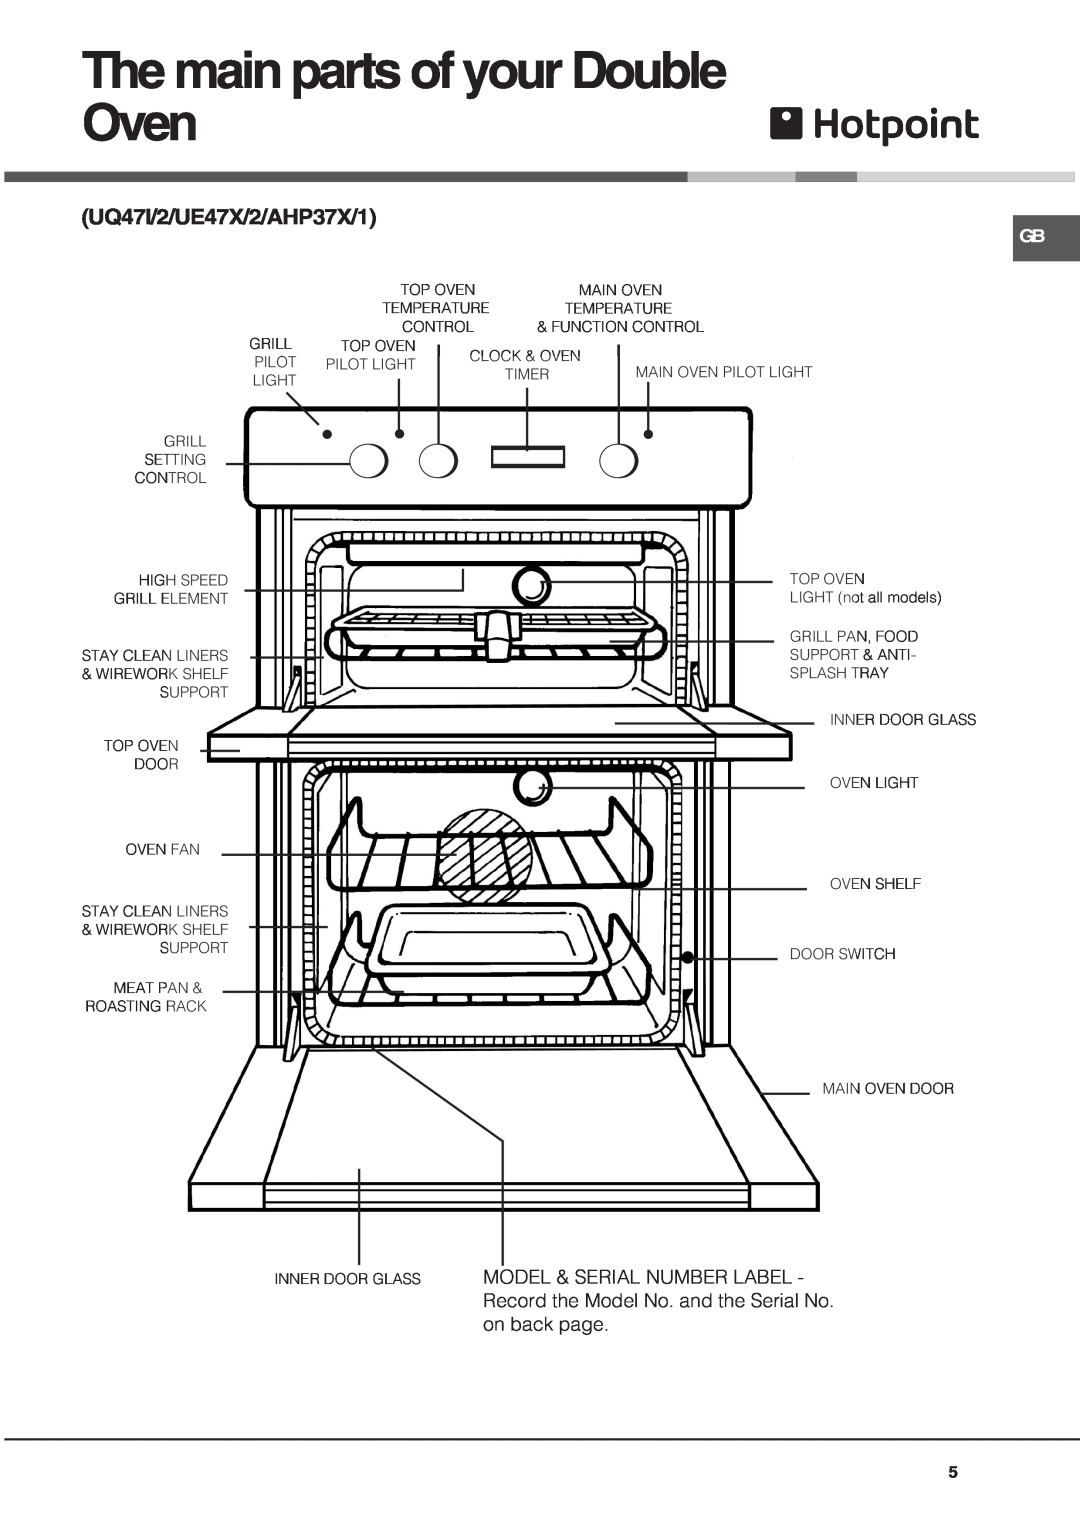 Hotpoint BU72P2, UQ47I2, UE47X2, BU82SS2, AHP37X2, BU72B, BU72K2 The main parts of your Double Oven, UQ47I/2/UE47X/2/AHP37X/1 